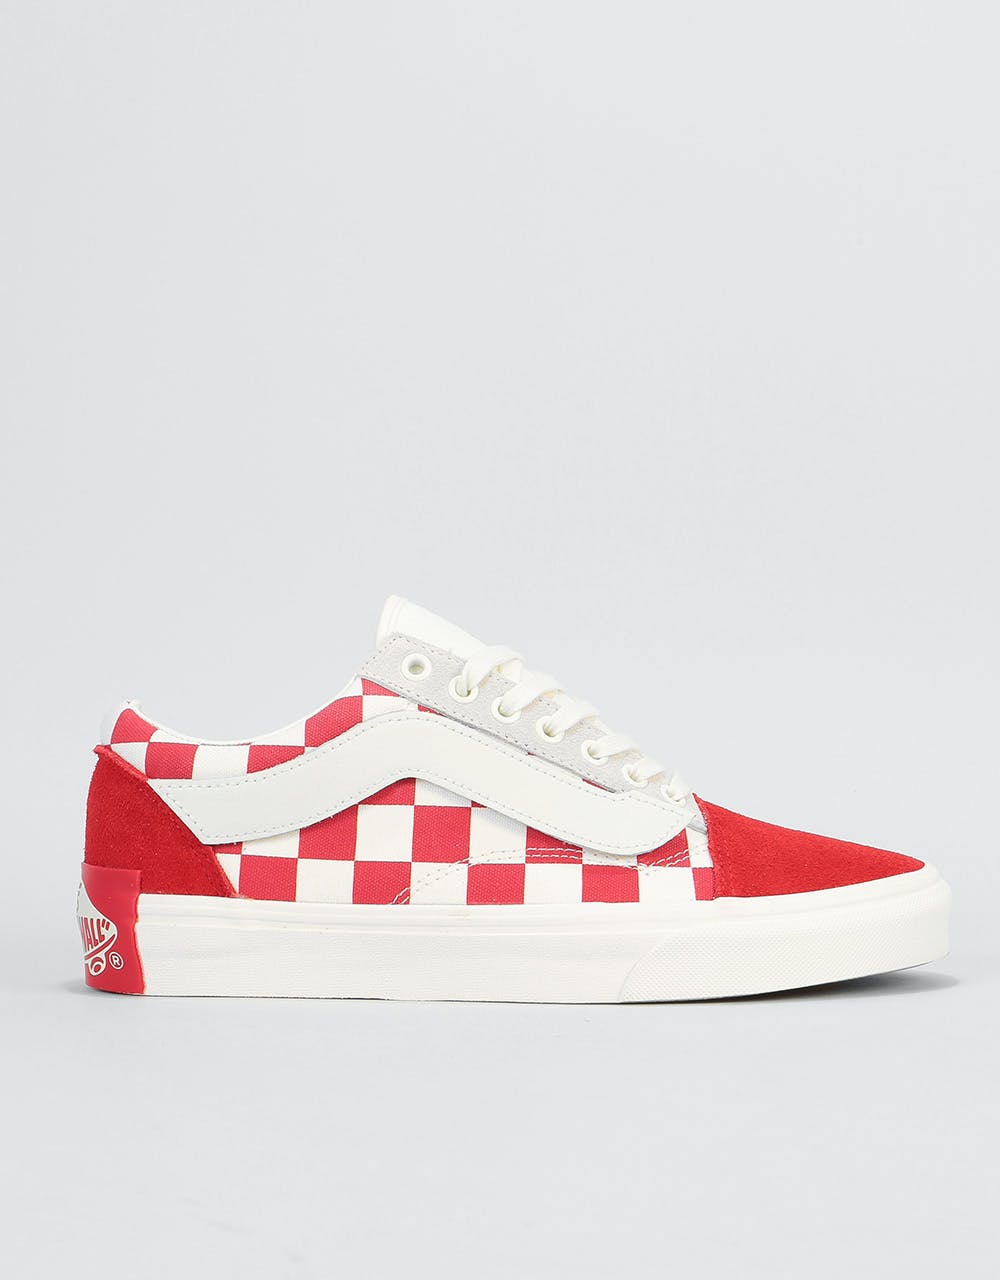 Vans  Old Skool Skate Shoes - (Y.O.P.Purlicue) Racing Red/Marshmallow